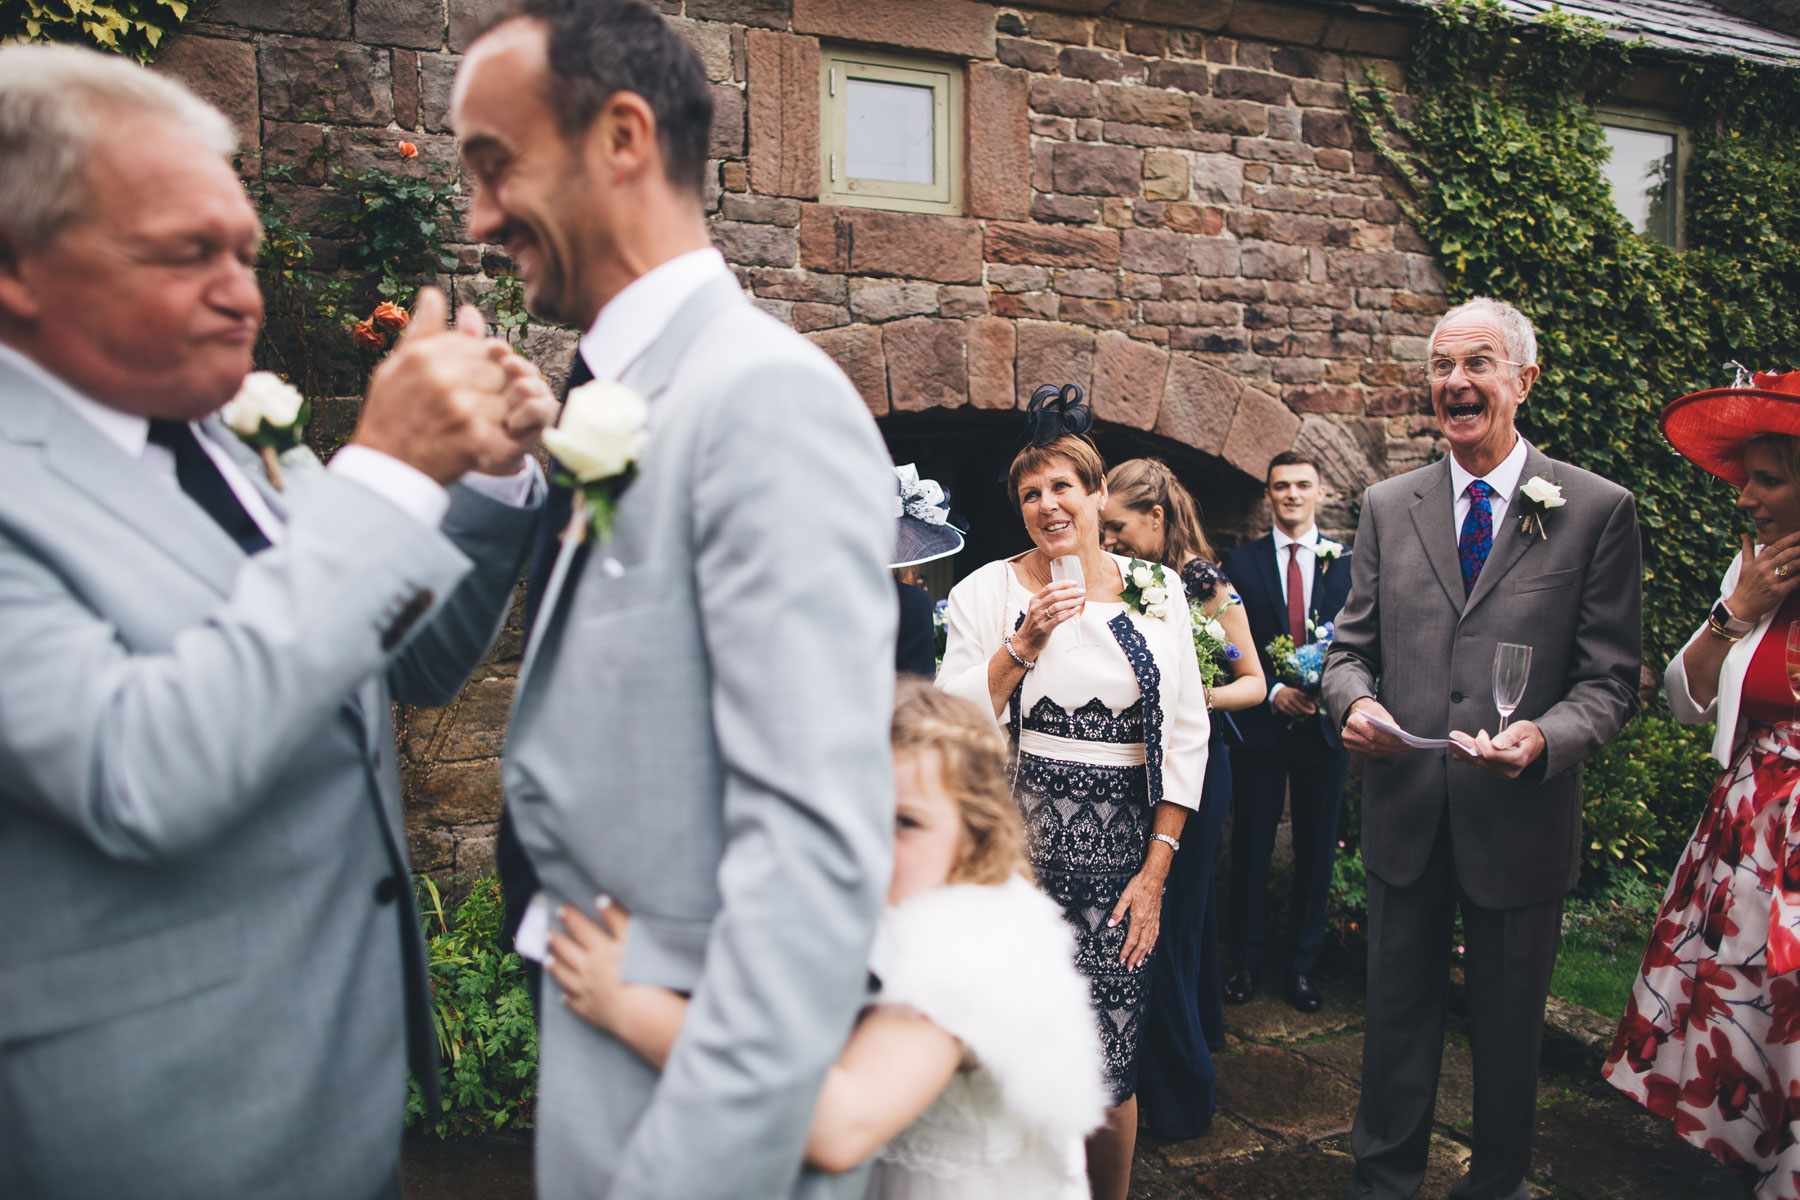 layered photographic composition of wedding guests